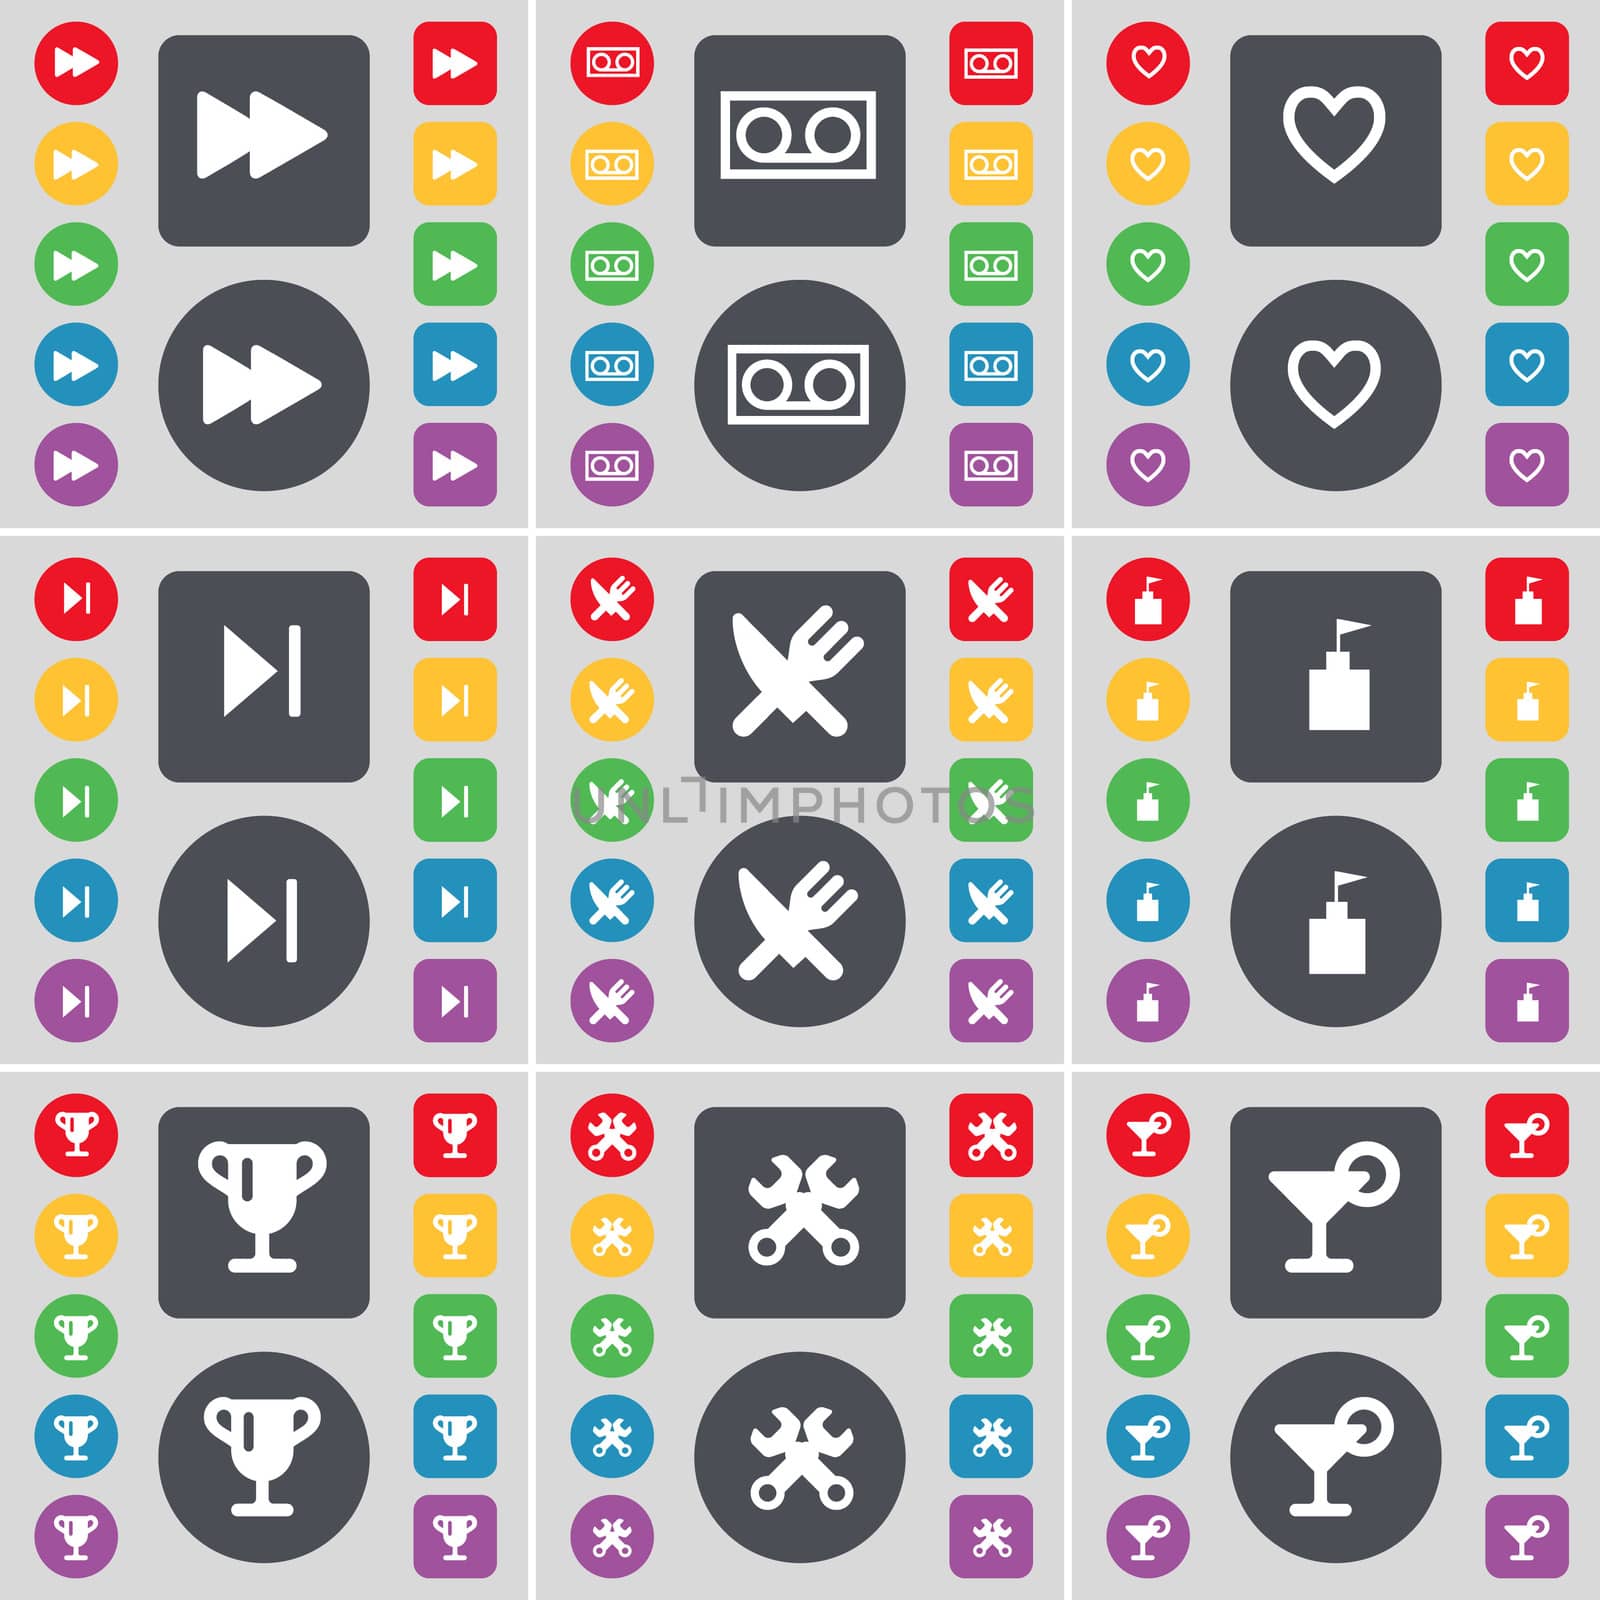 Rewind, Cassette, Heart, Media skip, Fork and knife, Flag tower, Cup, Wrench, Cocktail icon symbol. A large set of flat, colored buttons for your design. illustration